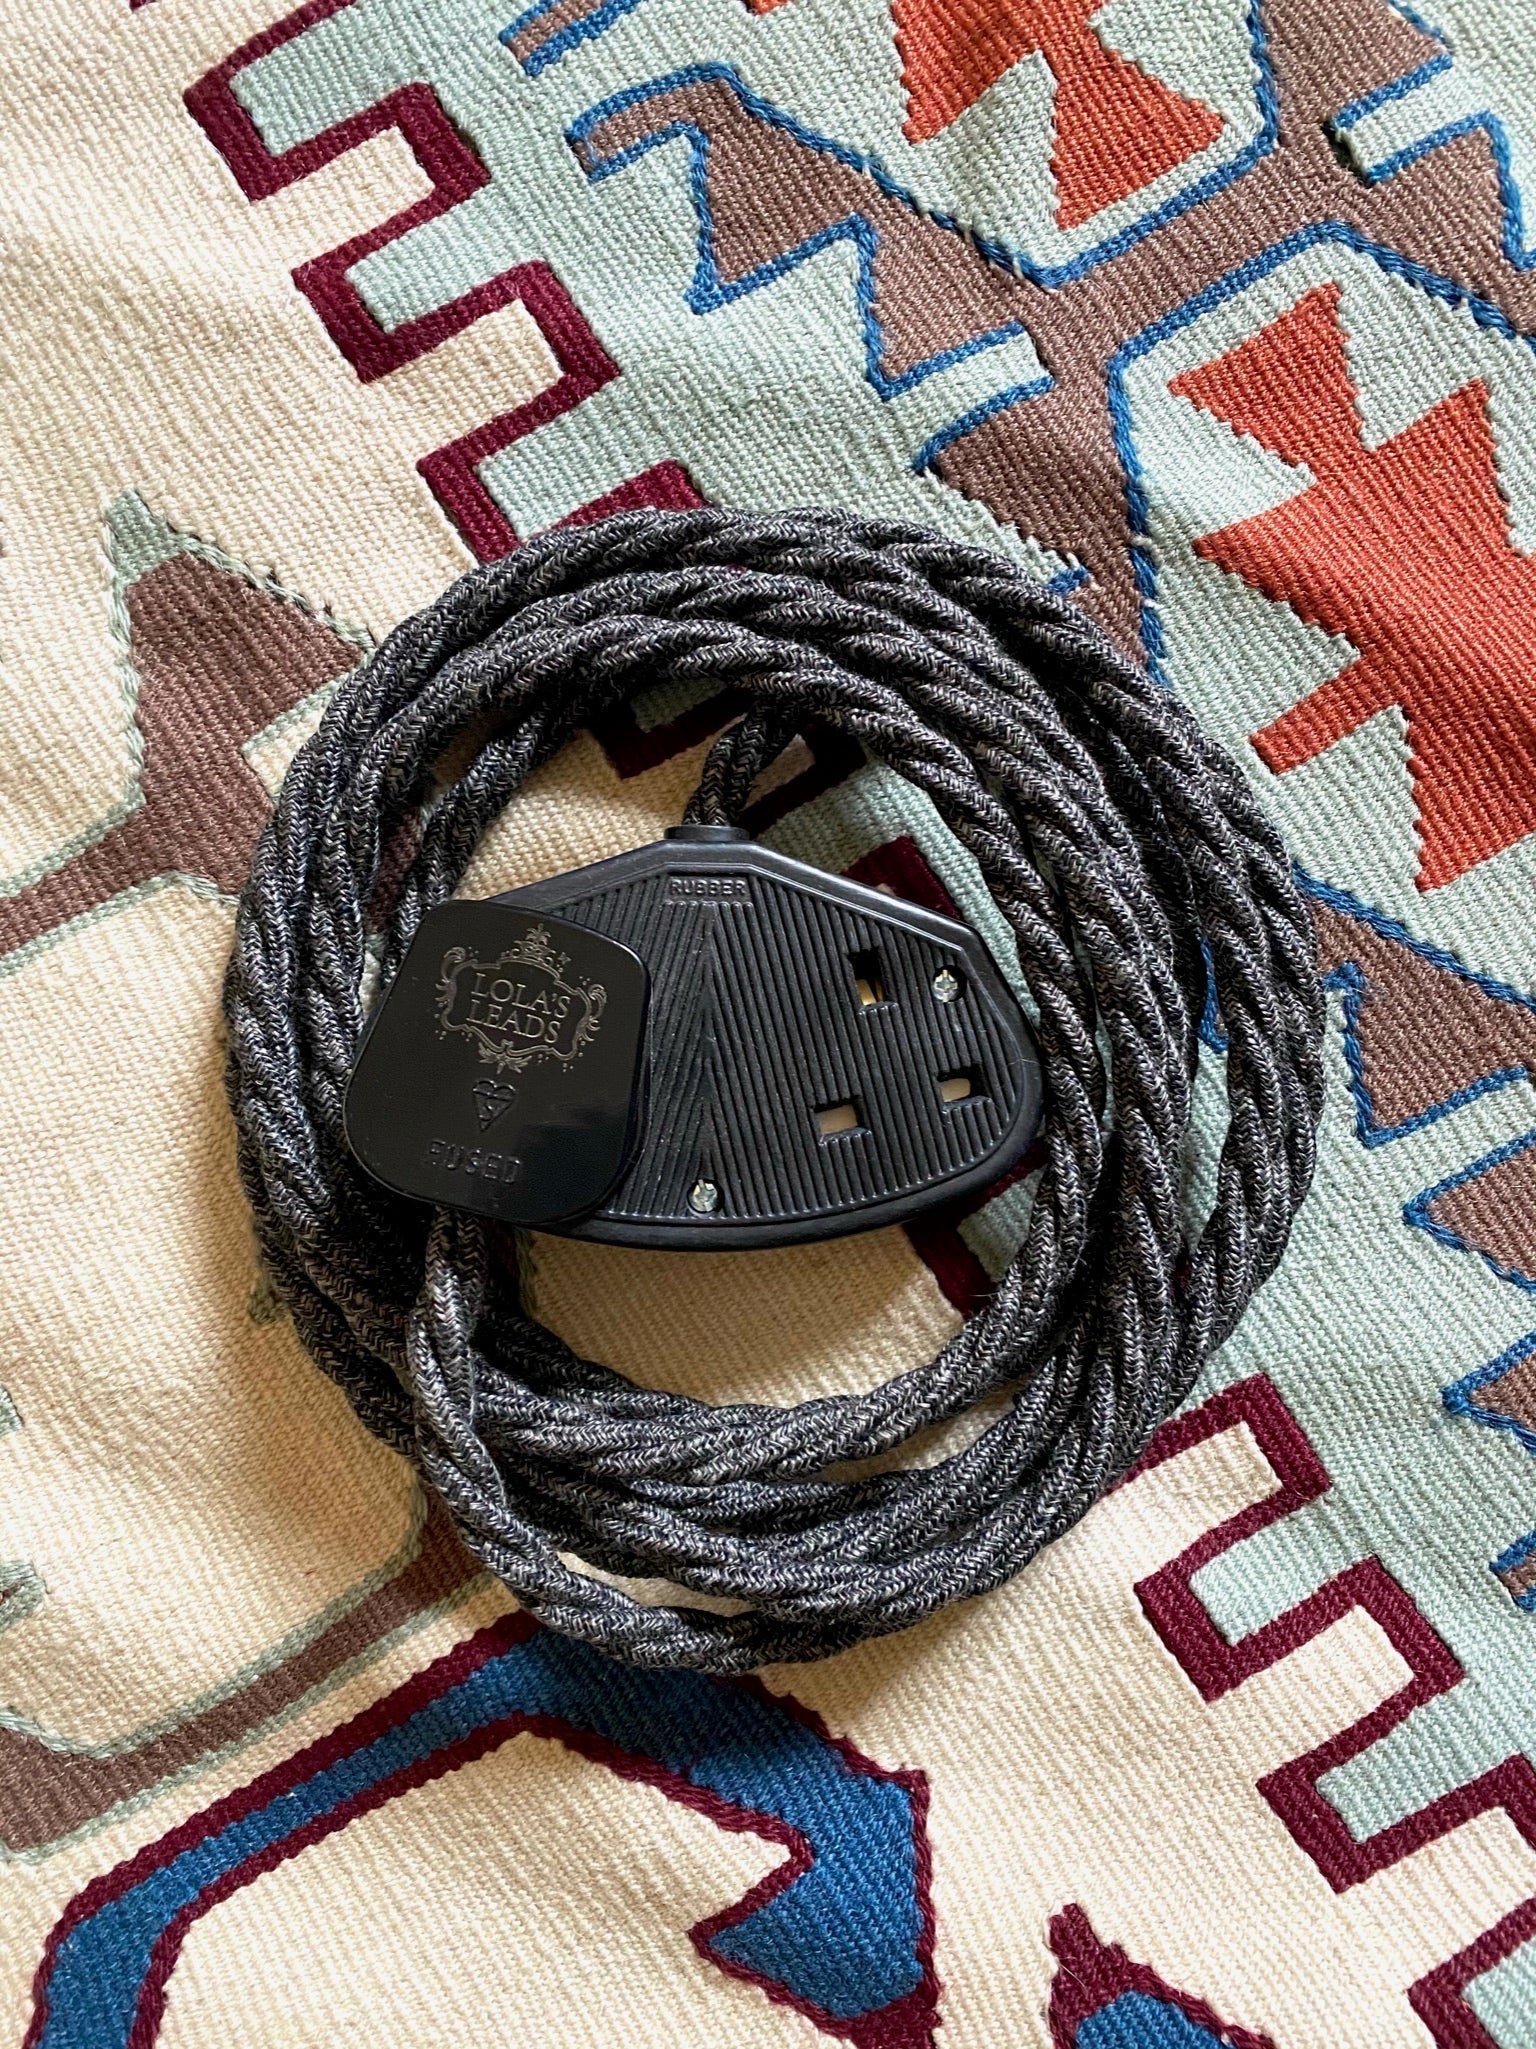 Lola's Leads Anthracite Grey Linen Fabric Covered Extension Lead